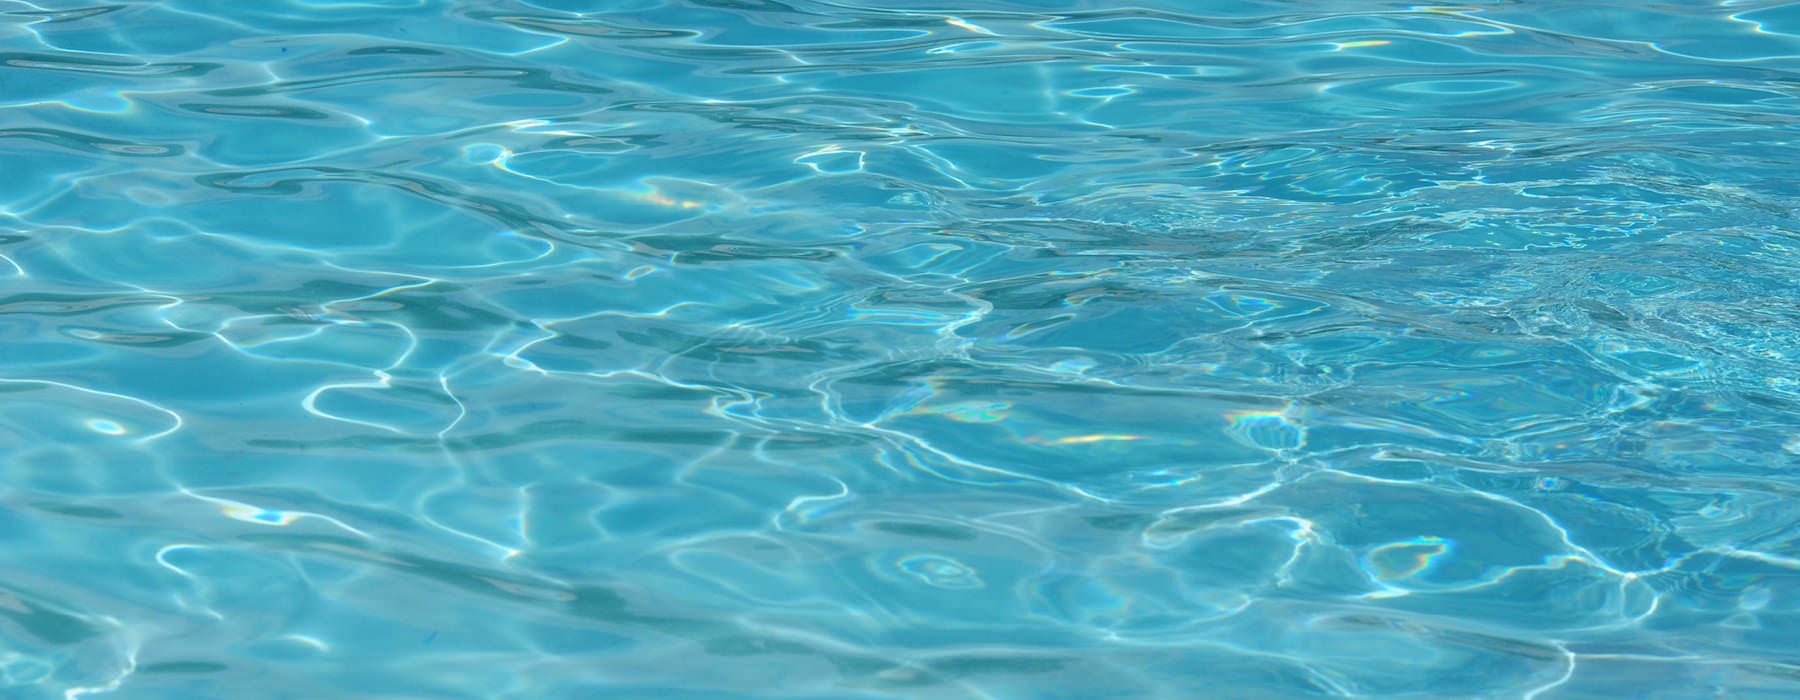 close up of water in swimming pool